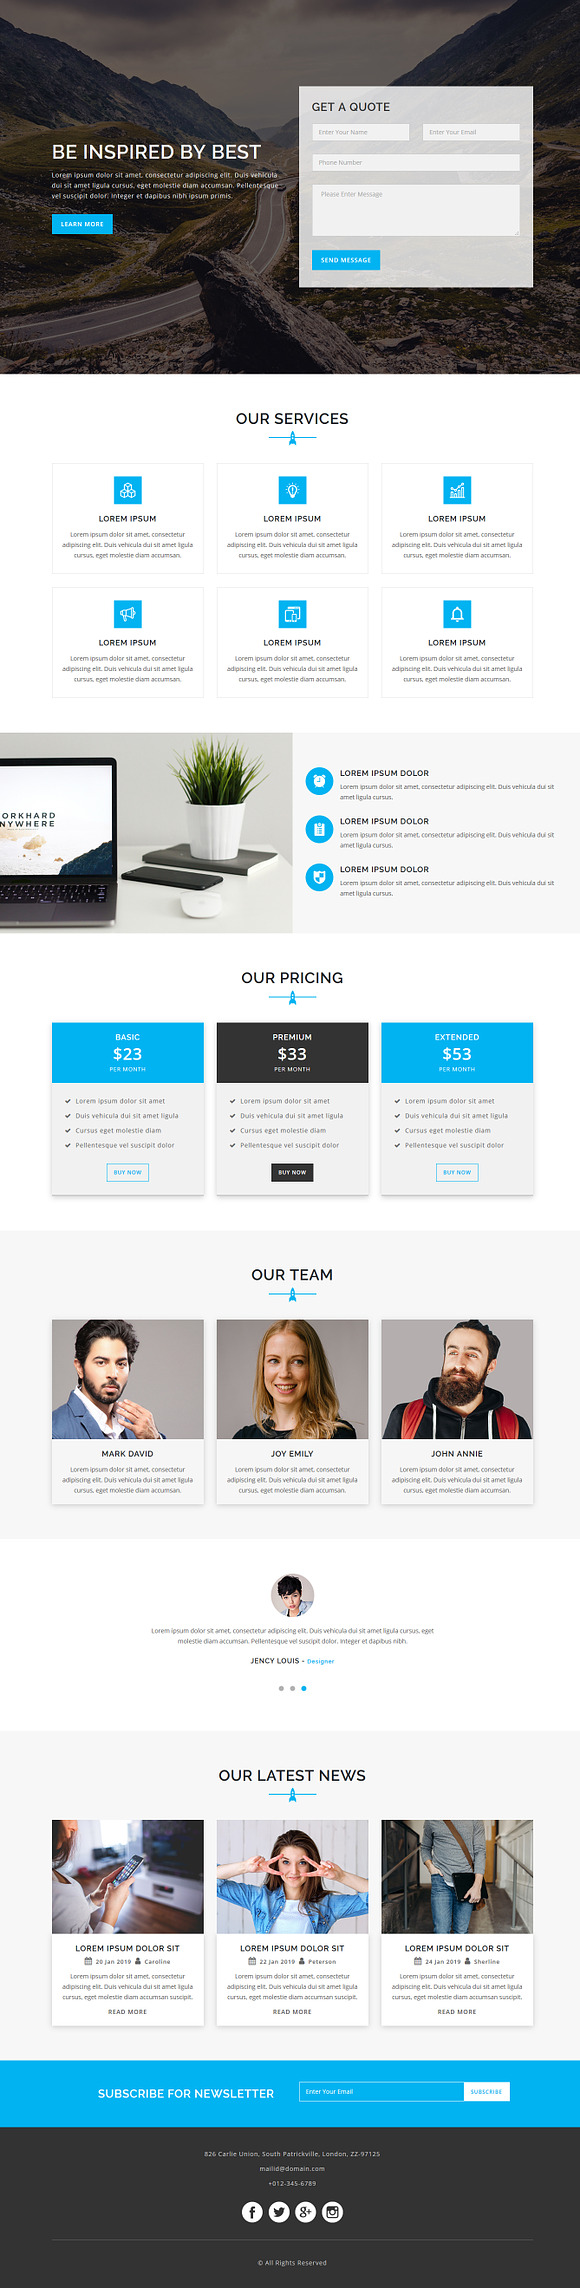 iStart -Responsive HTML Landing Page in Bootstrap Themes - product preview 1